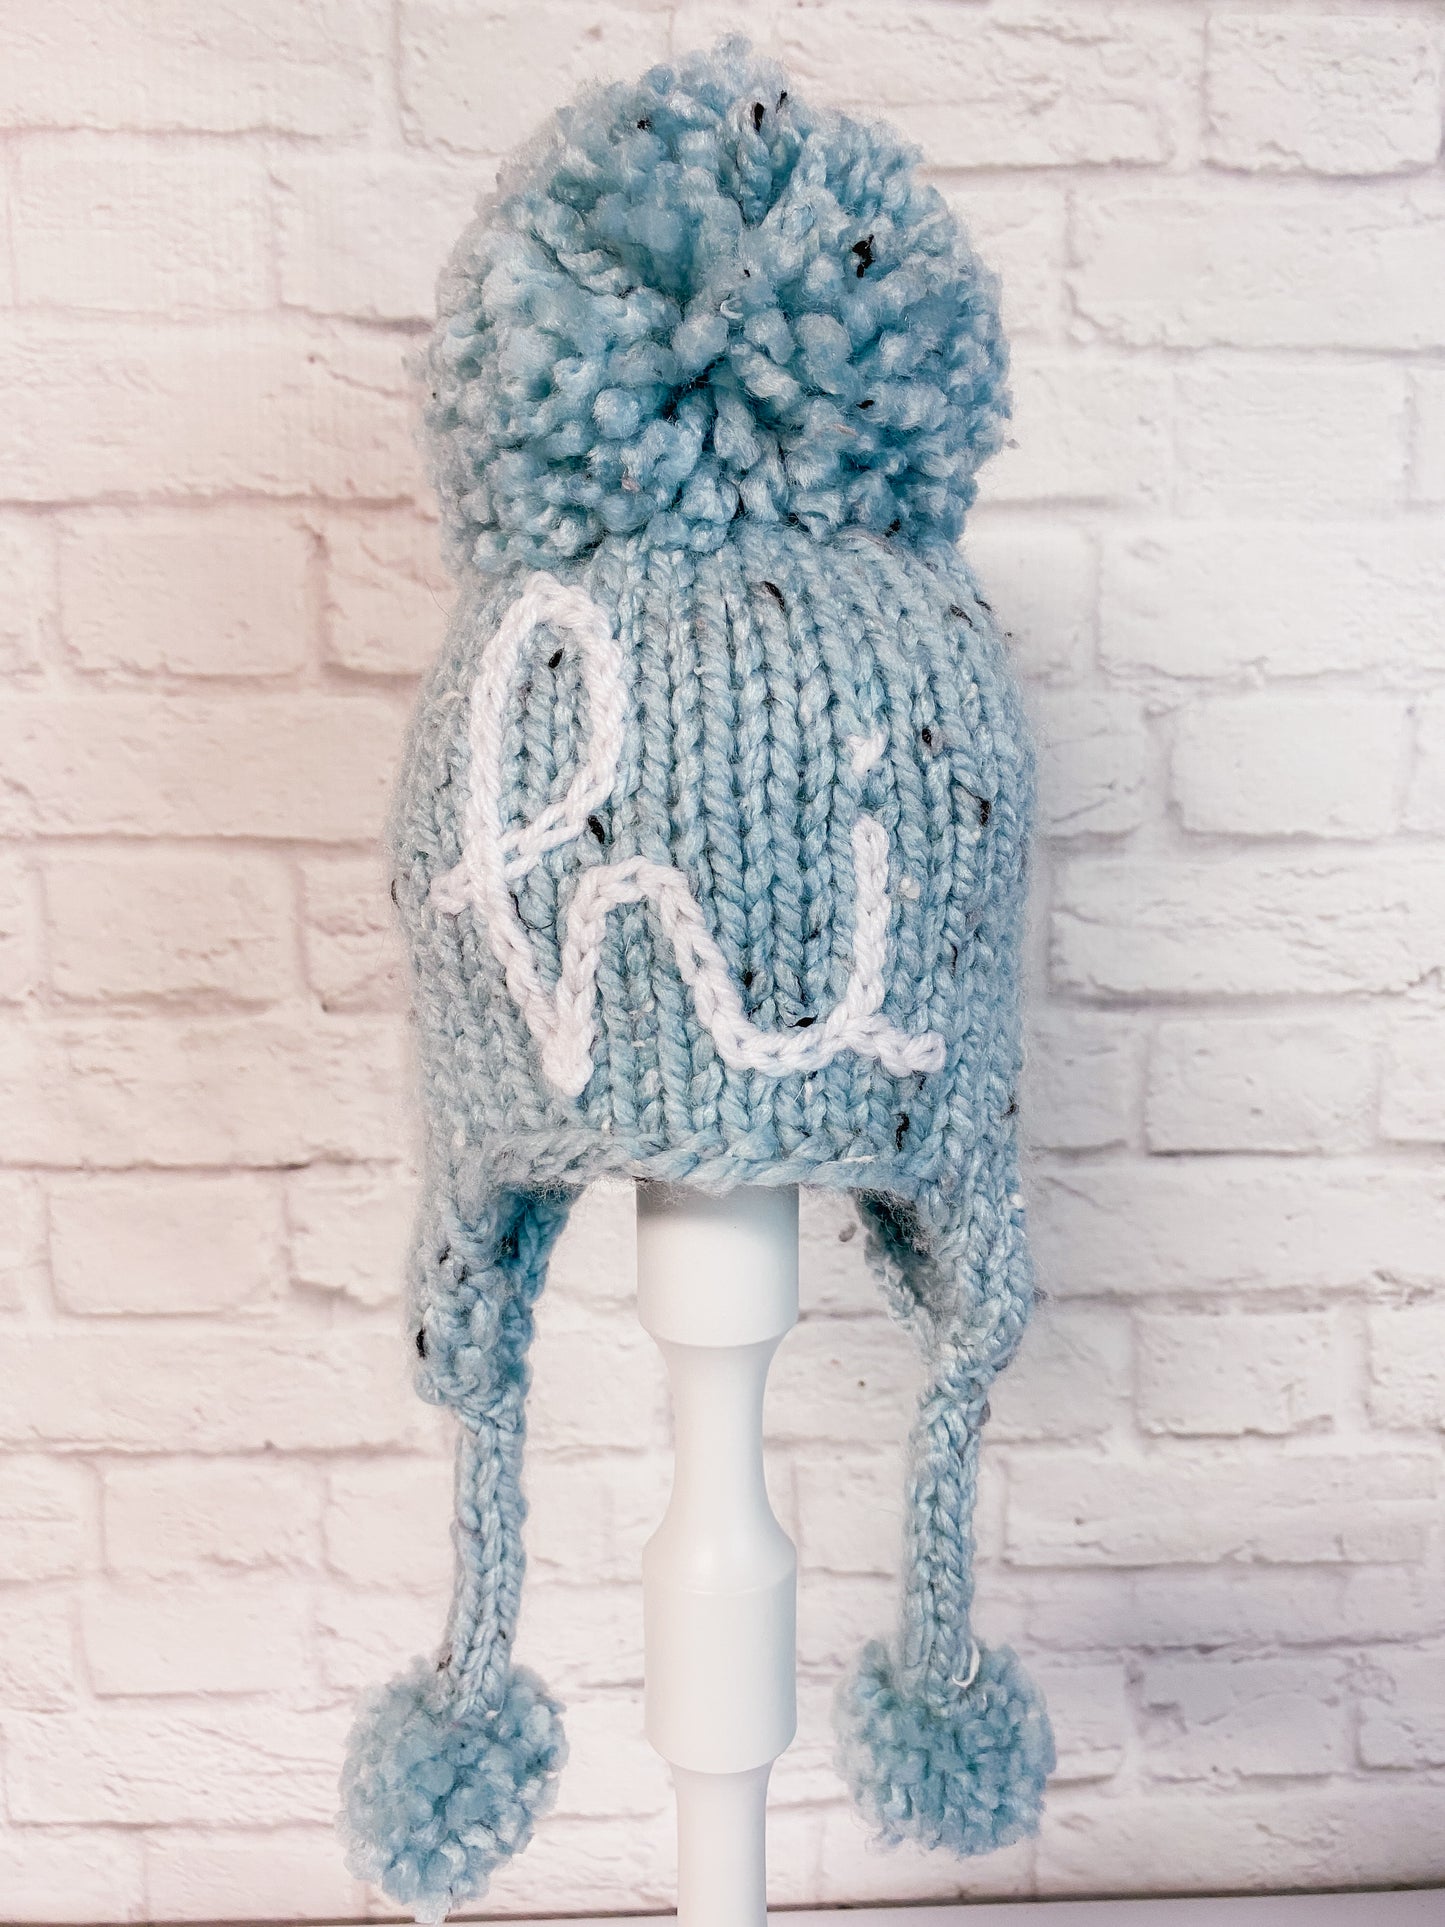 Knitted Hi Hat, Baby and Toddler Beanies for Pregnancy Announcement, Gender Reveal, Going Home Outfit